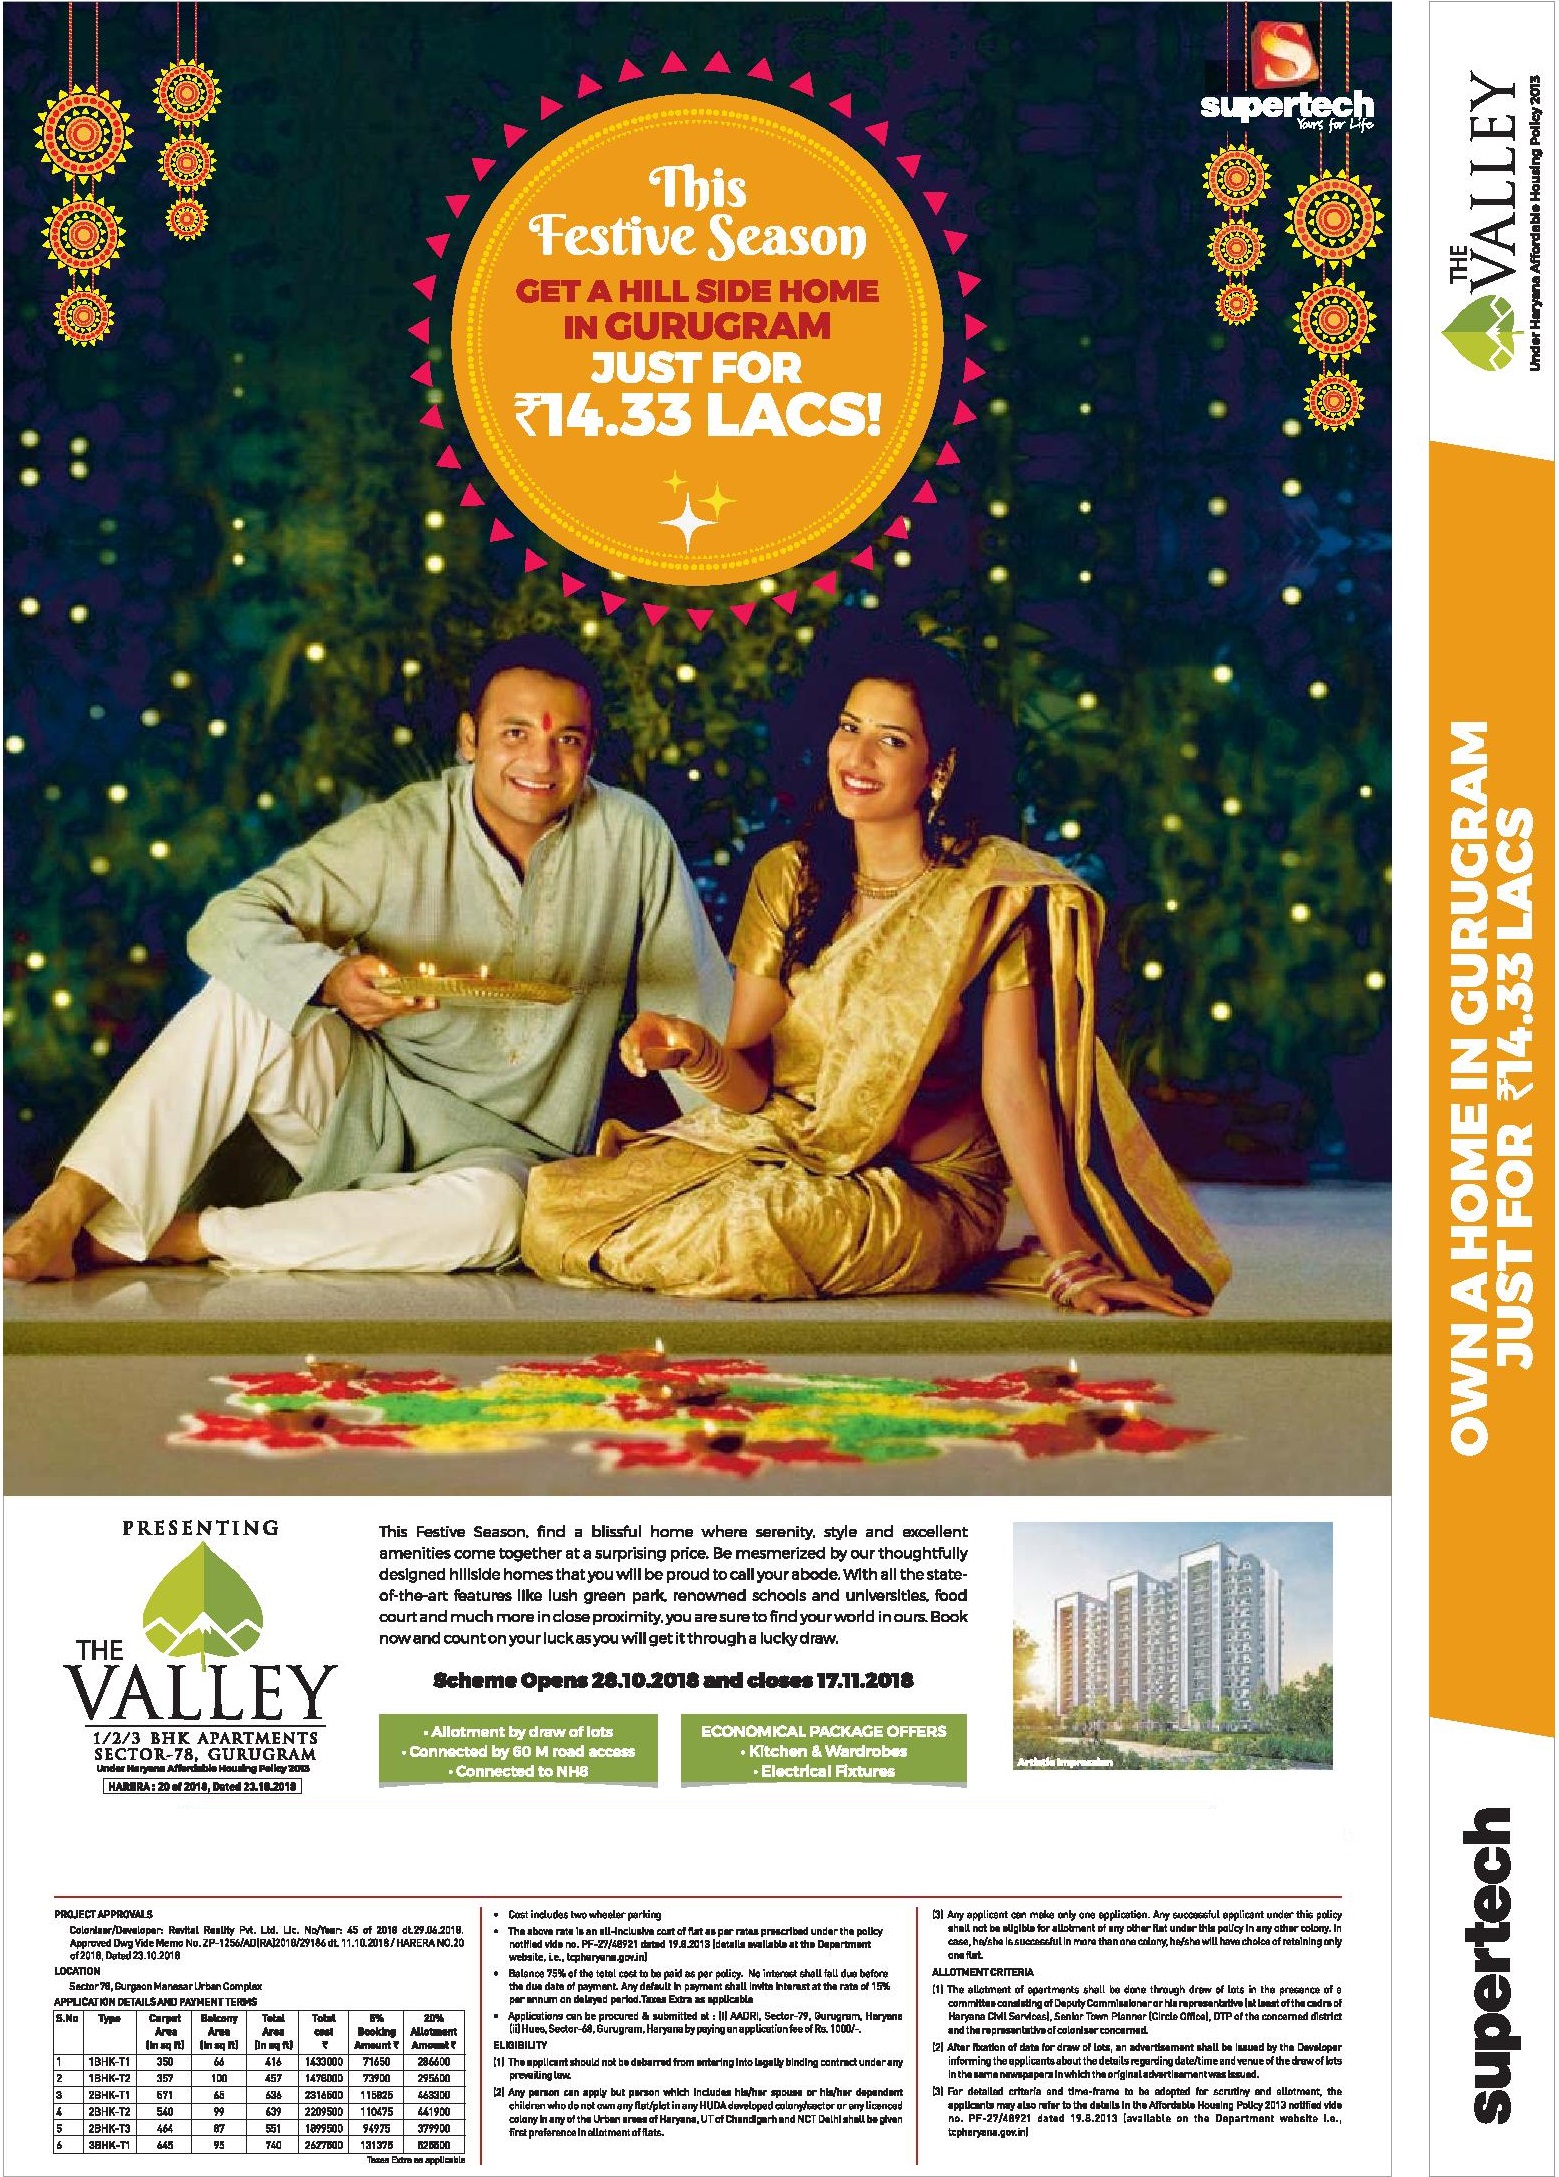 Supertech presenting 1/2/3 bhk apartments @ Rs. 14.33 lakhs at The Valley in Gurgaon Update